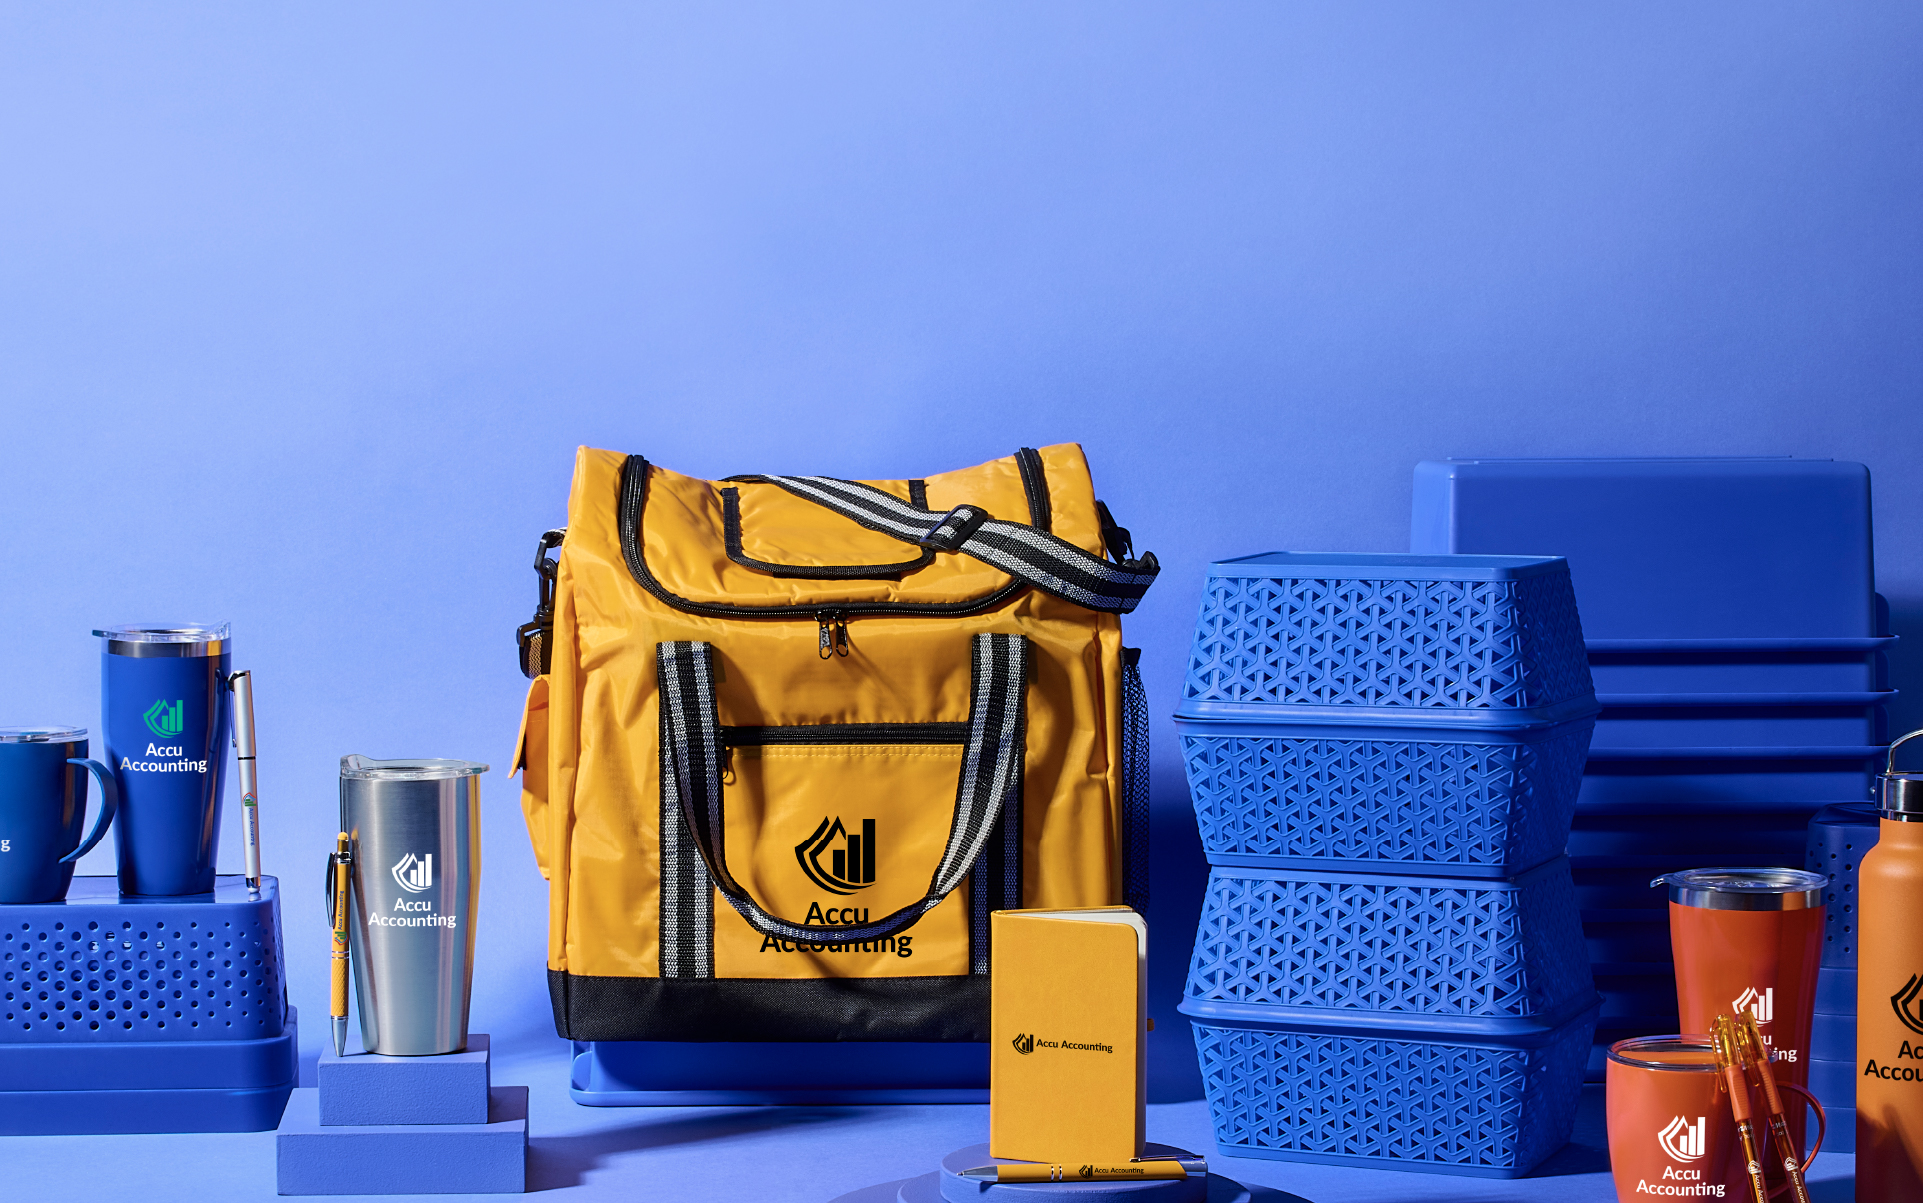 A variety of trade show promotional products on display against a blue background - metal tumblers with logos, orange bags, notbooks, lanyards and water bottles.